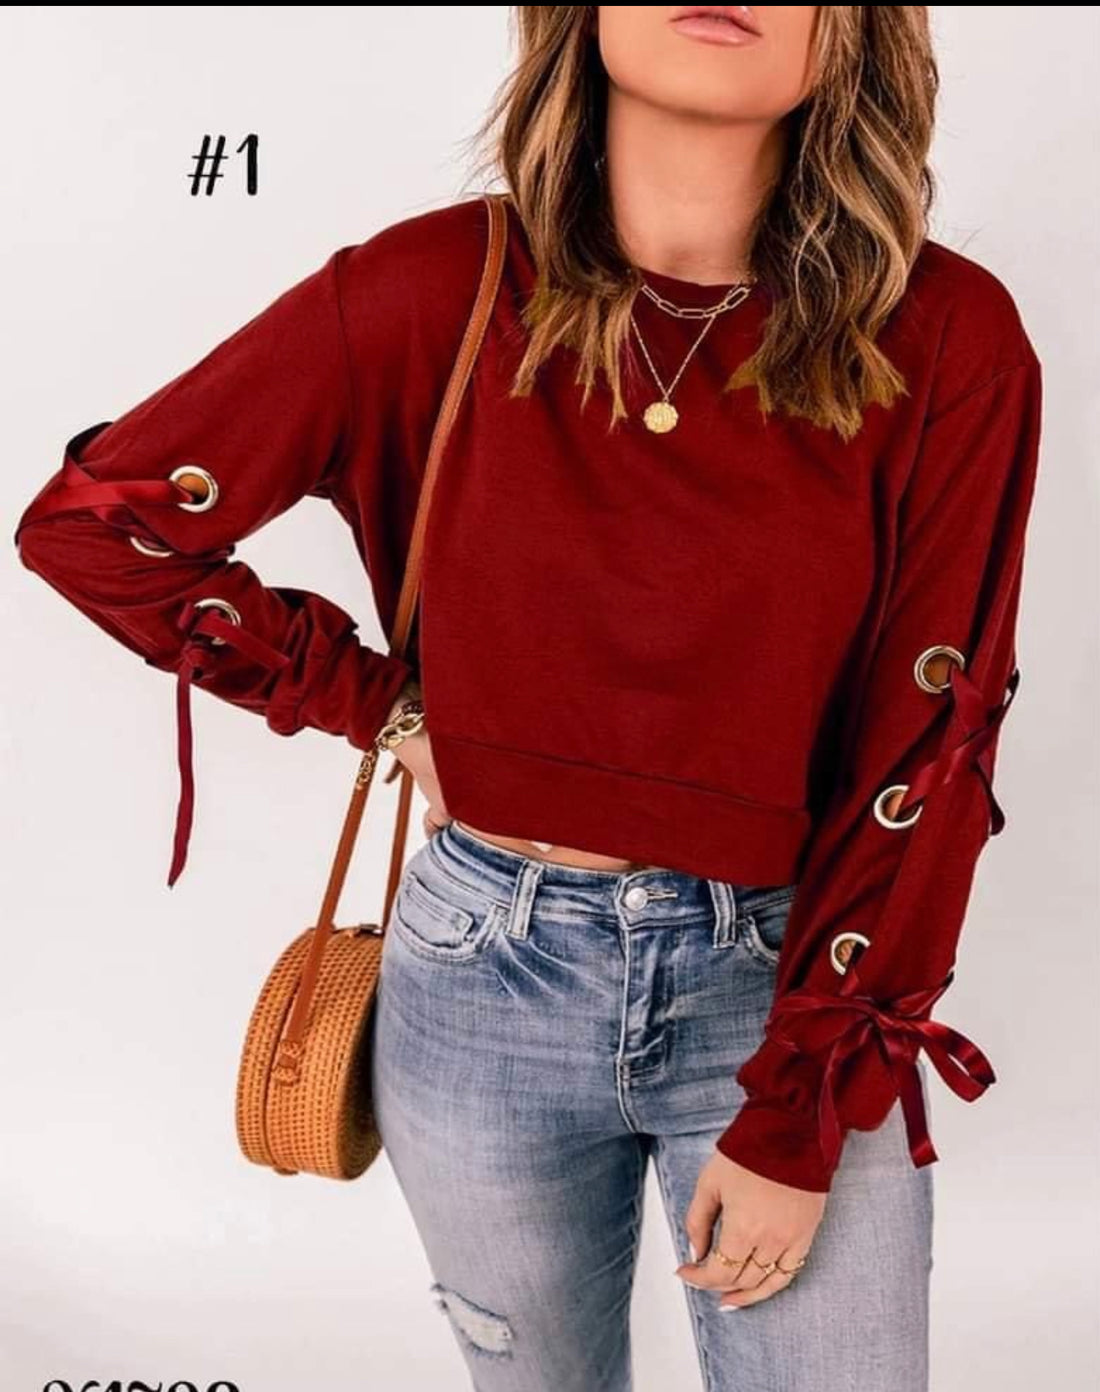 Red-Colored Crop Top Shirt with Lace-up Sleeves